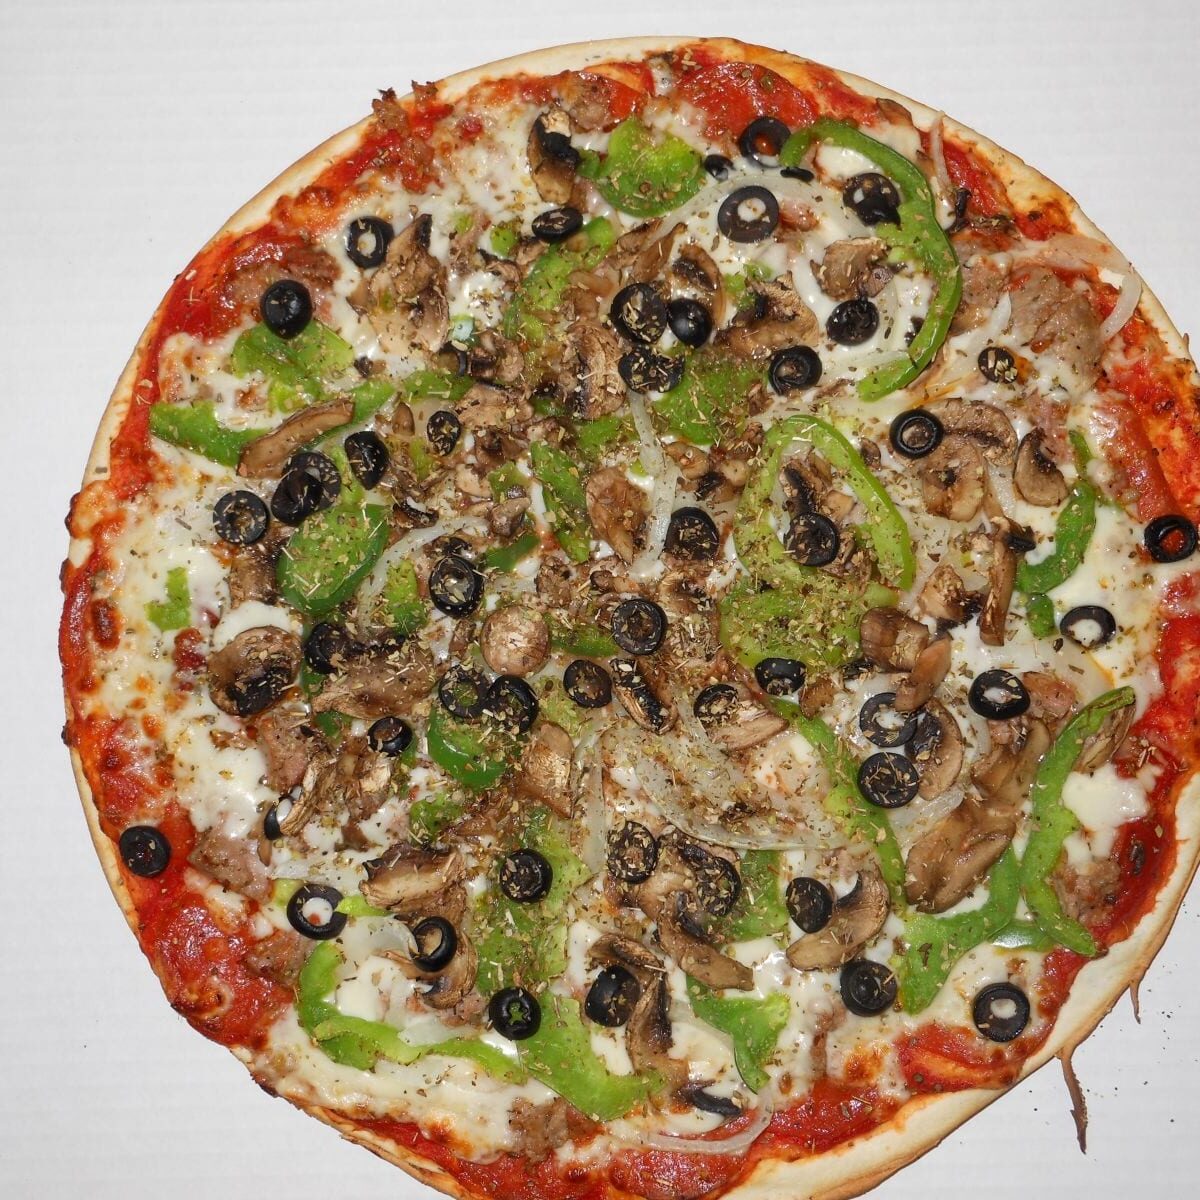 A pizza with mushrooms, green peppers and black olives.